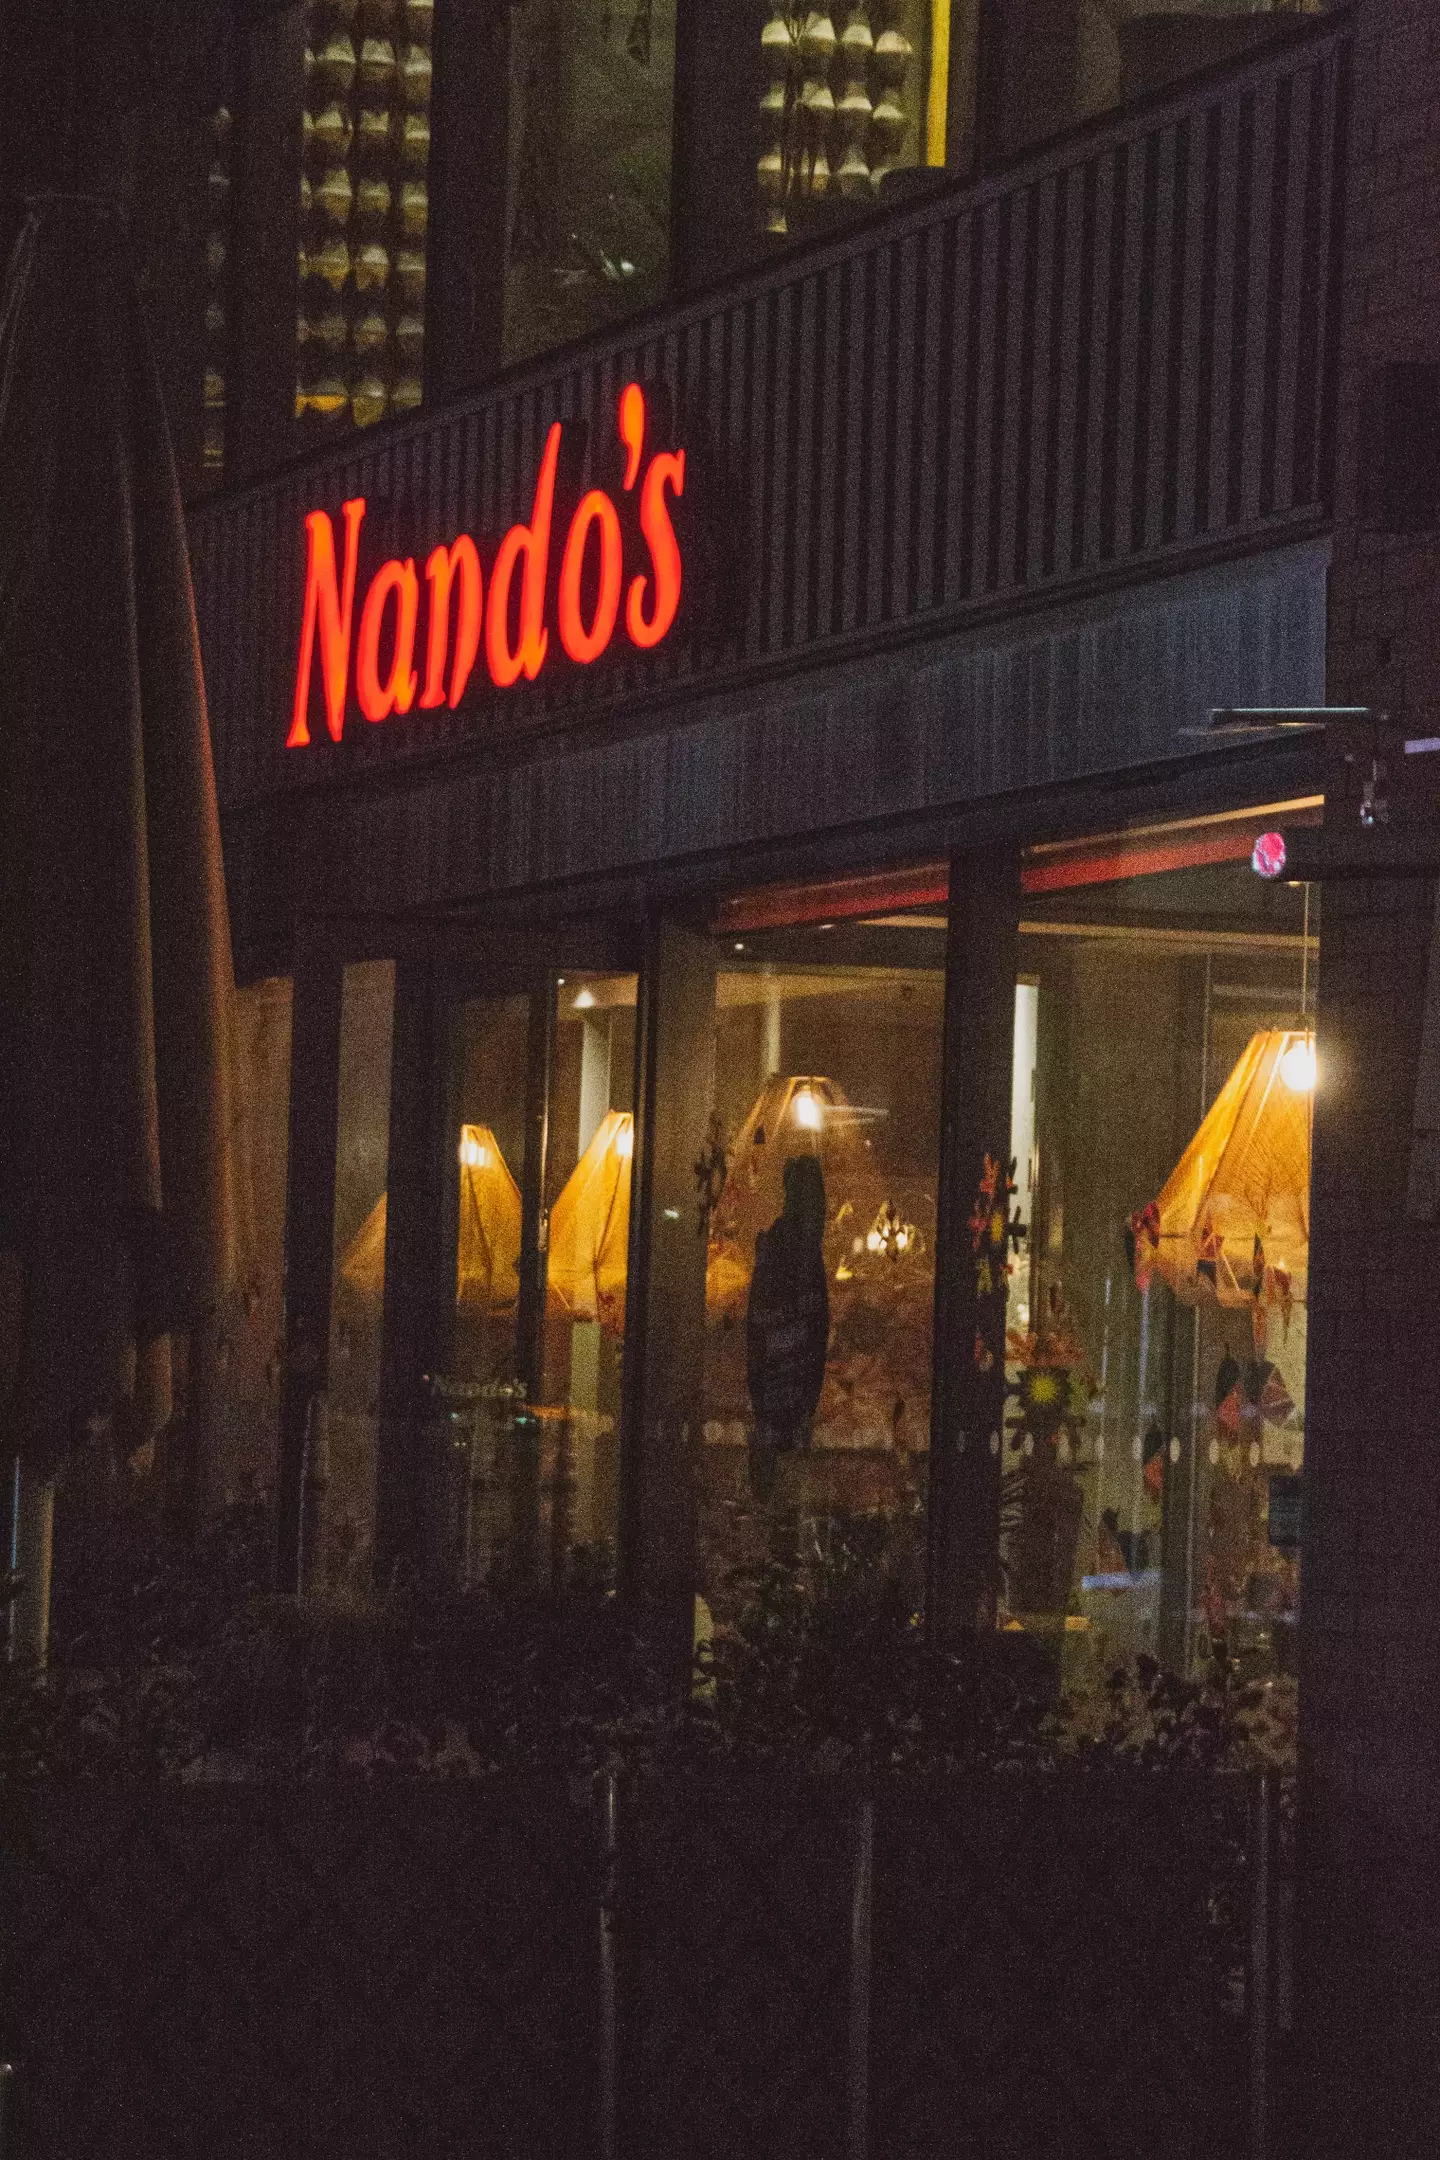 Nando's is adding an exciting new item to its menu.